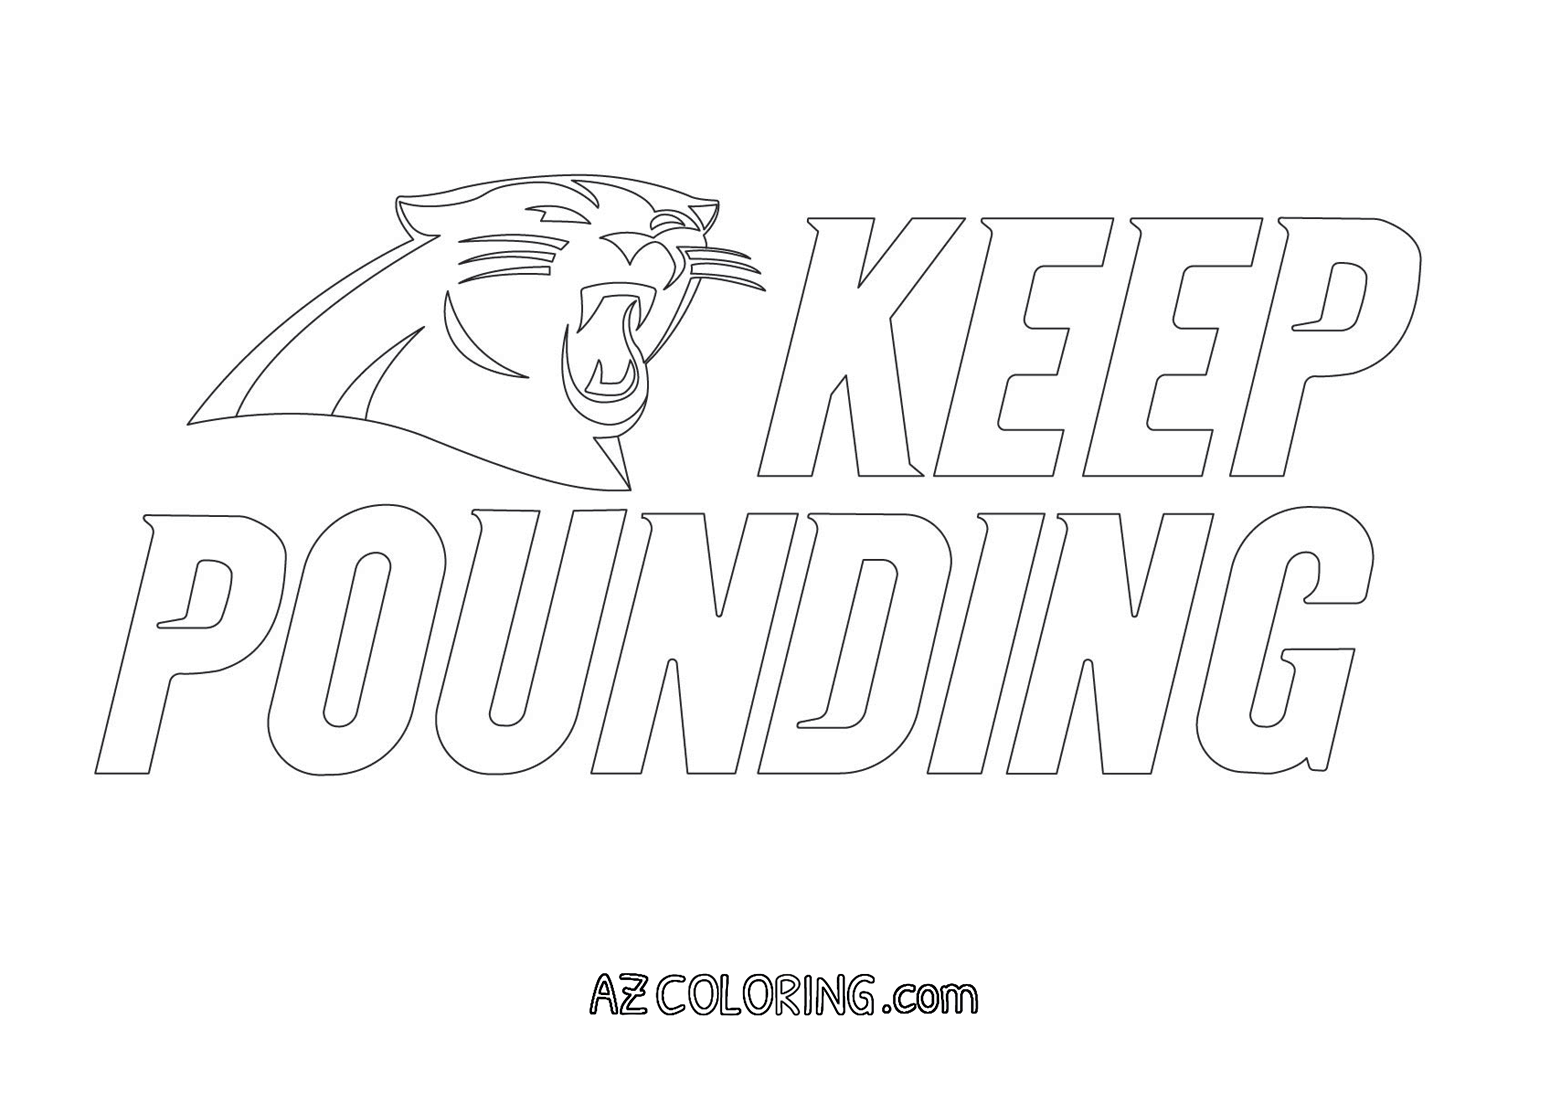 Carolina Panthers Coloring Pages - Coloring Home